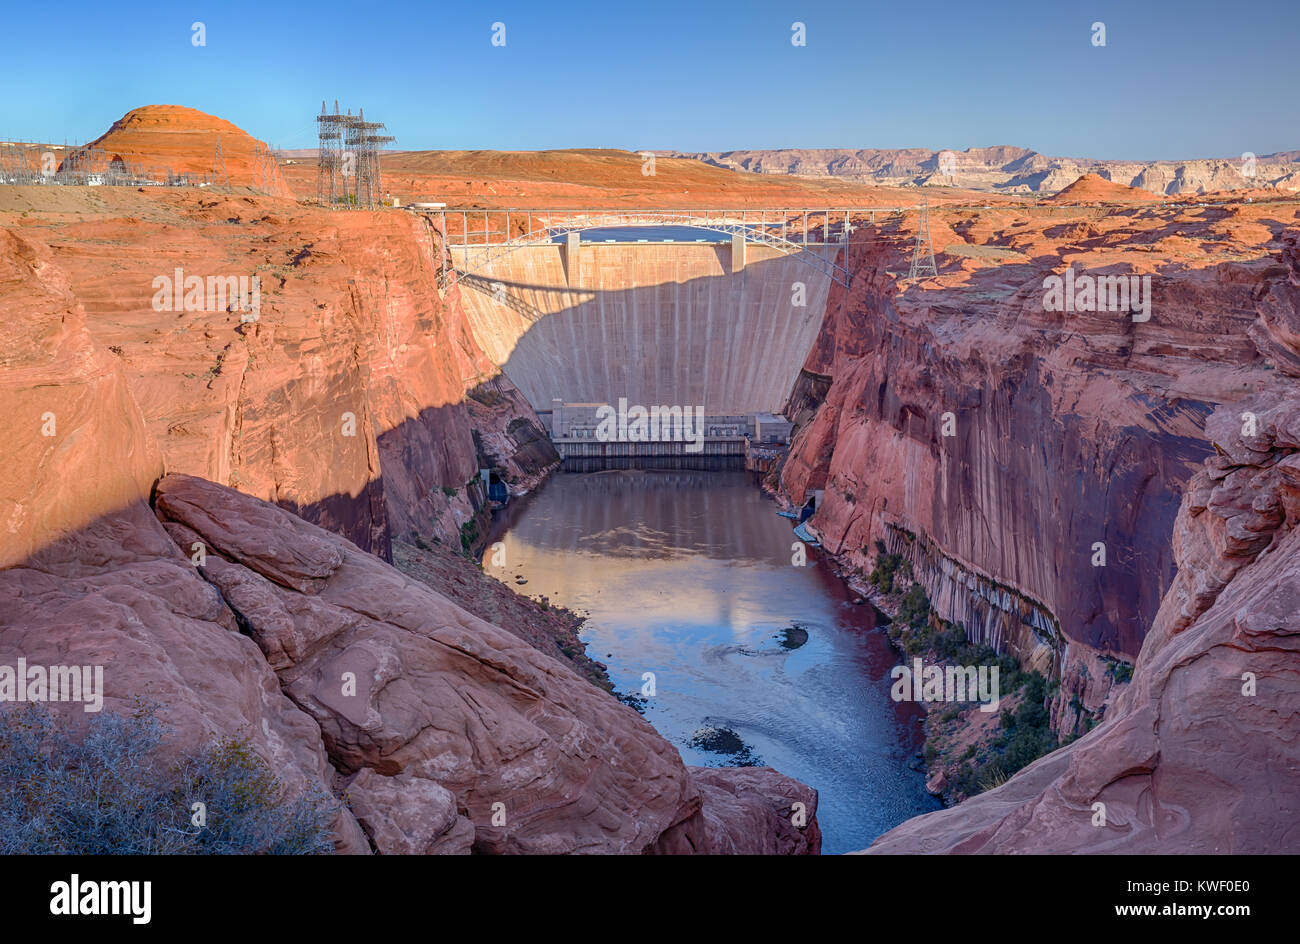 The Glen Canyon Dam on the Colorado River in Page, Arizona was built by the United States Bureau of Reclamation in 1966.  The dam forms Lake Powell Stock Photo